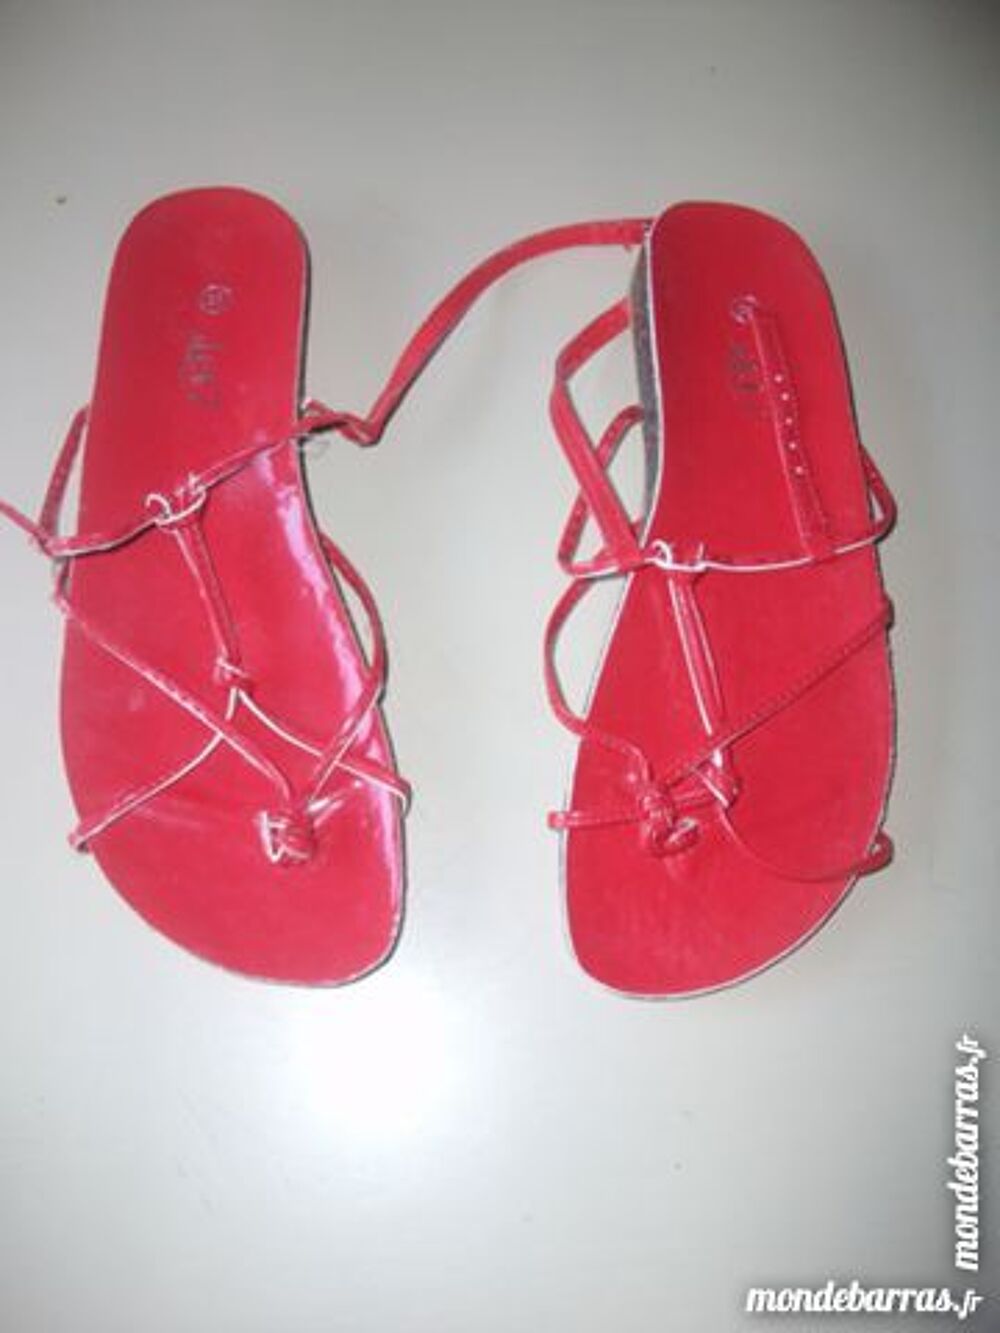 Sandales entredoigts Rouge pt 38 -neuves- &agrave; 4  Chaussures